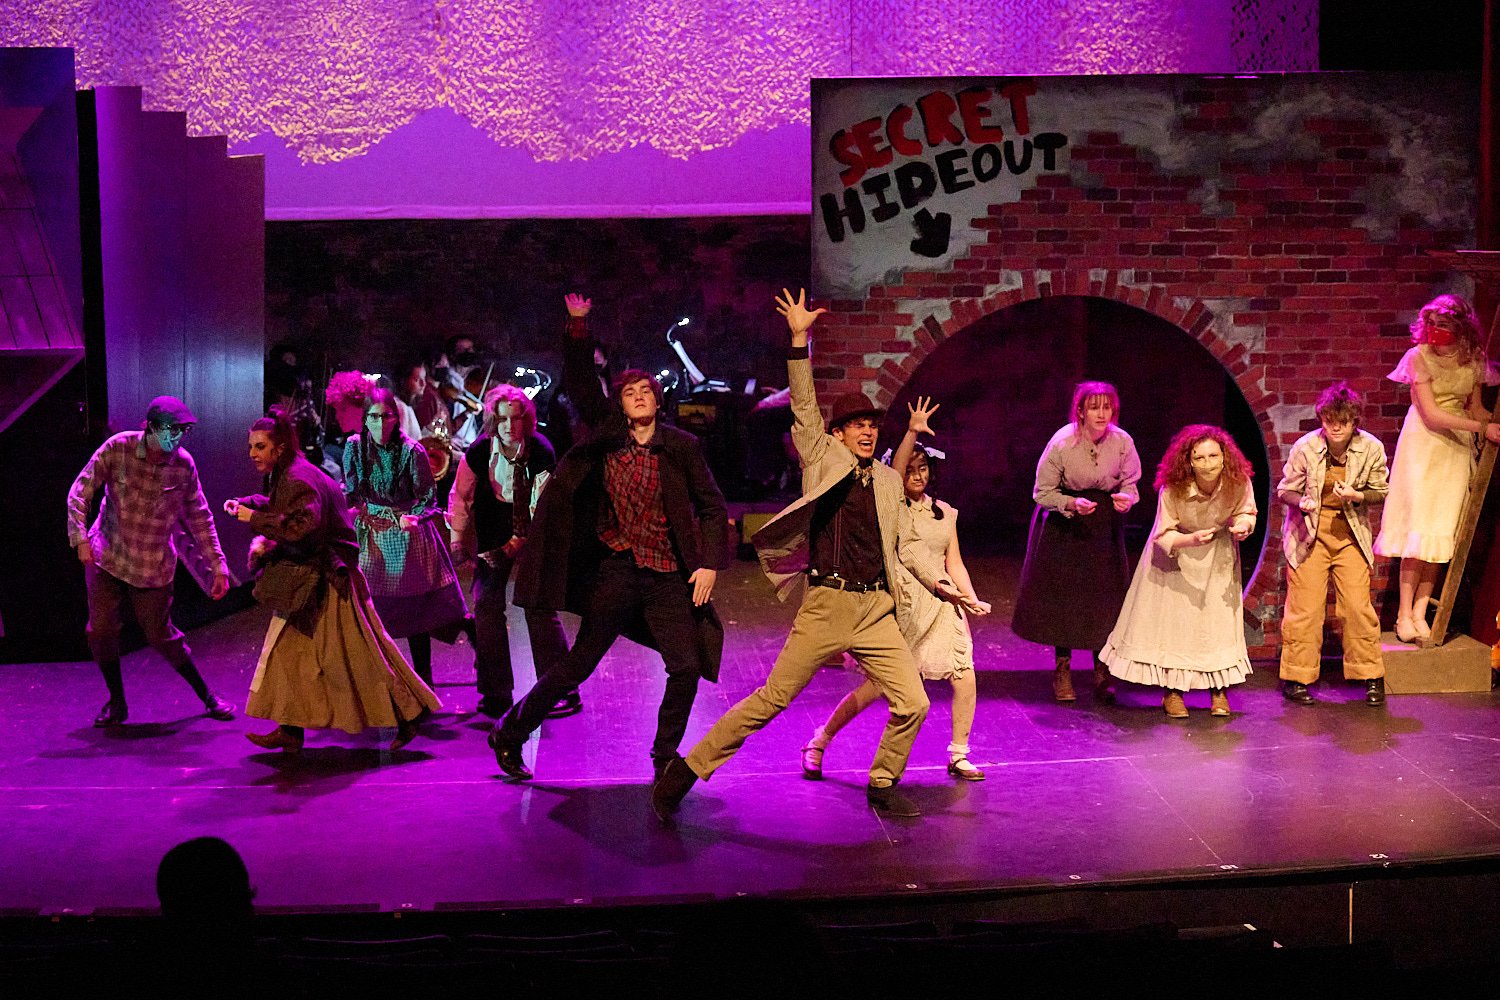  SEWICKLEY, PA, USA - MARCH 2ND 2022: High School students of Sewickley Academy are performing in an annual musical show “Urinetown” running on March 3rd-5th 2022. Logan Carlson 